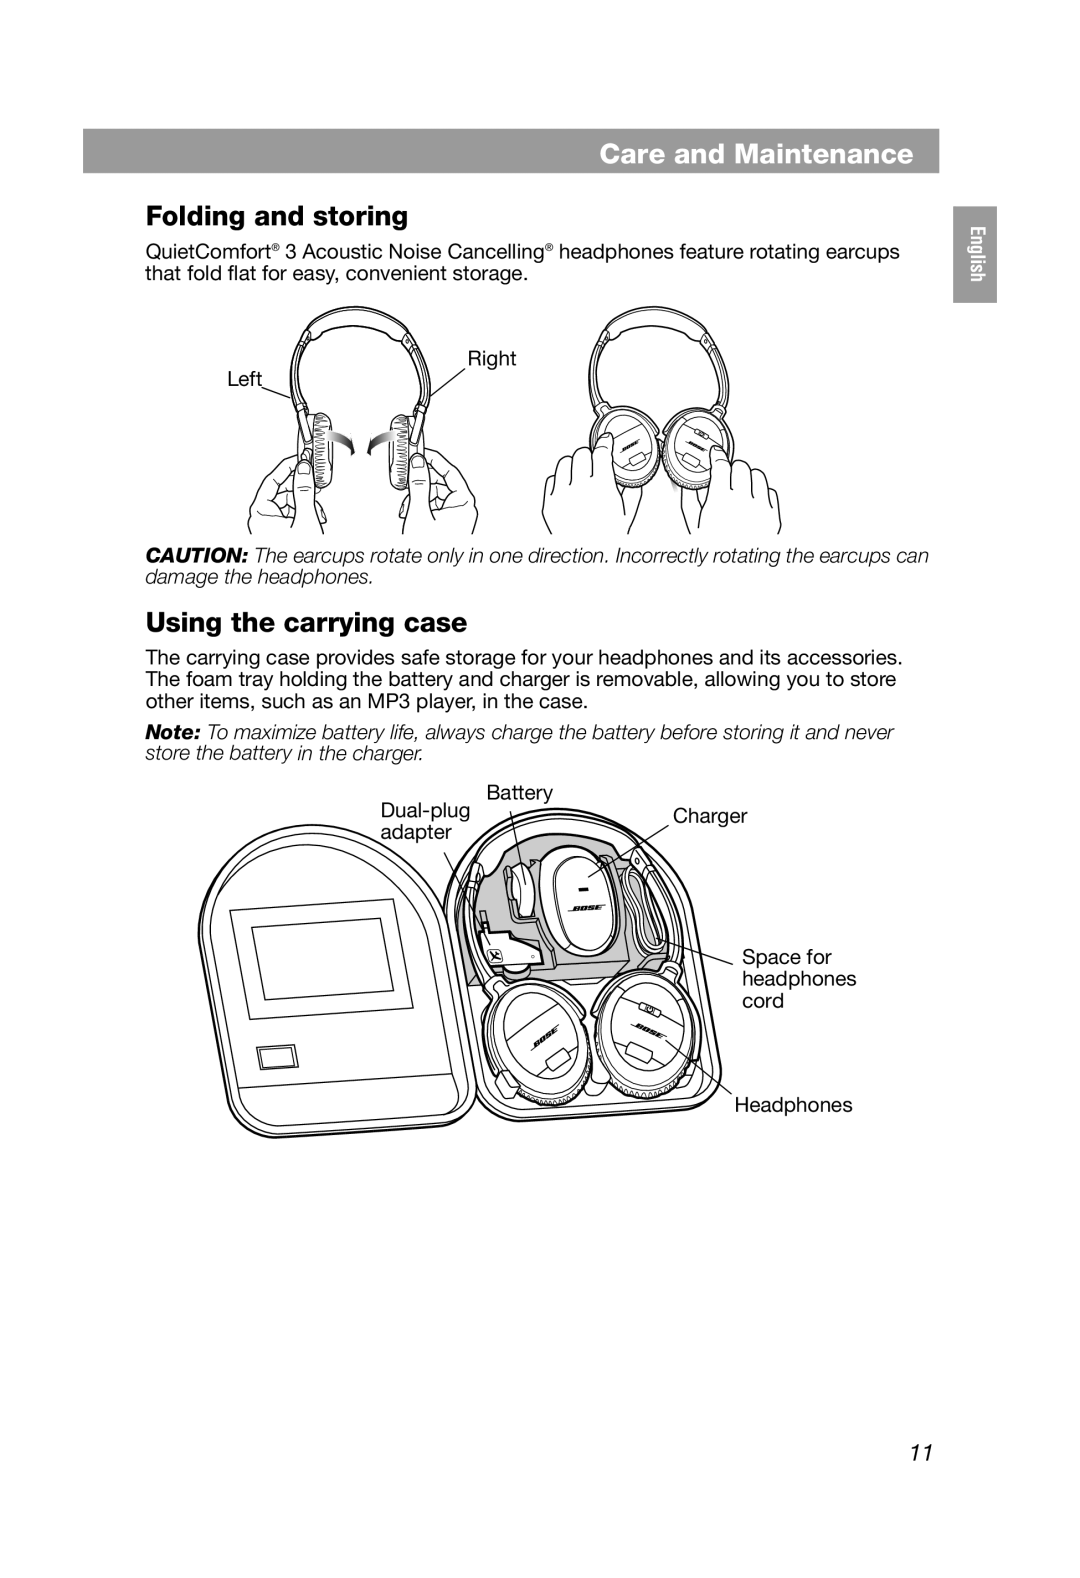 Bose QC3, QuietComfort 3 manual Care and Maintenance, Folding and storing, Using the carrying case, Français 